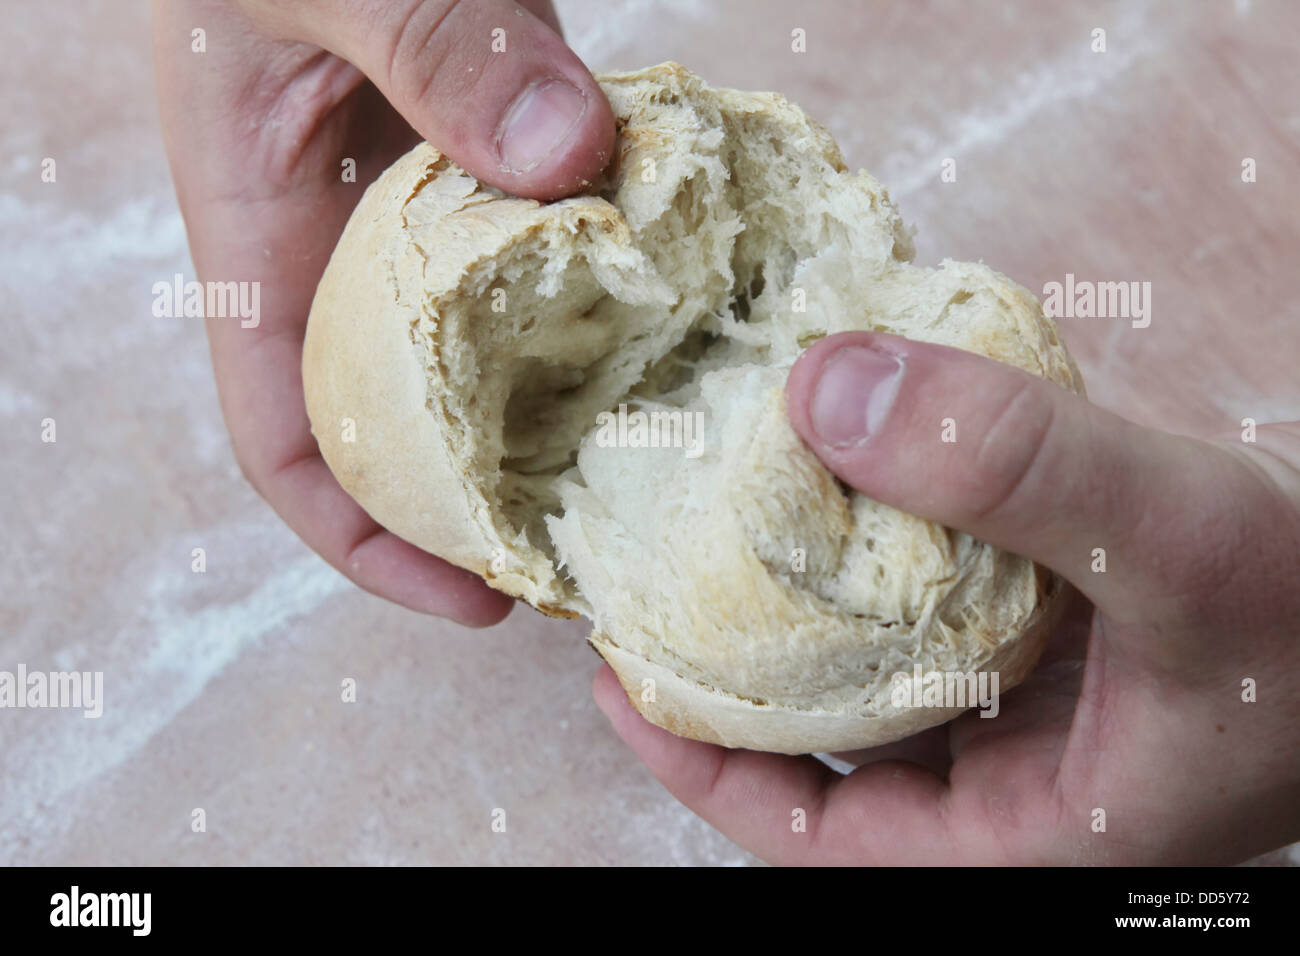 Baker inspects a freshly baked roll by cracking it open to see if the interior is sufficiently baked Stock Photo